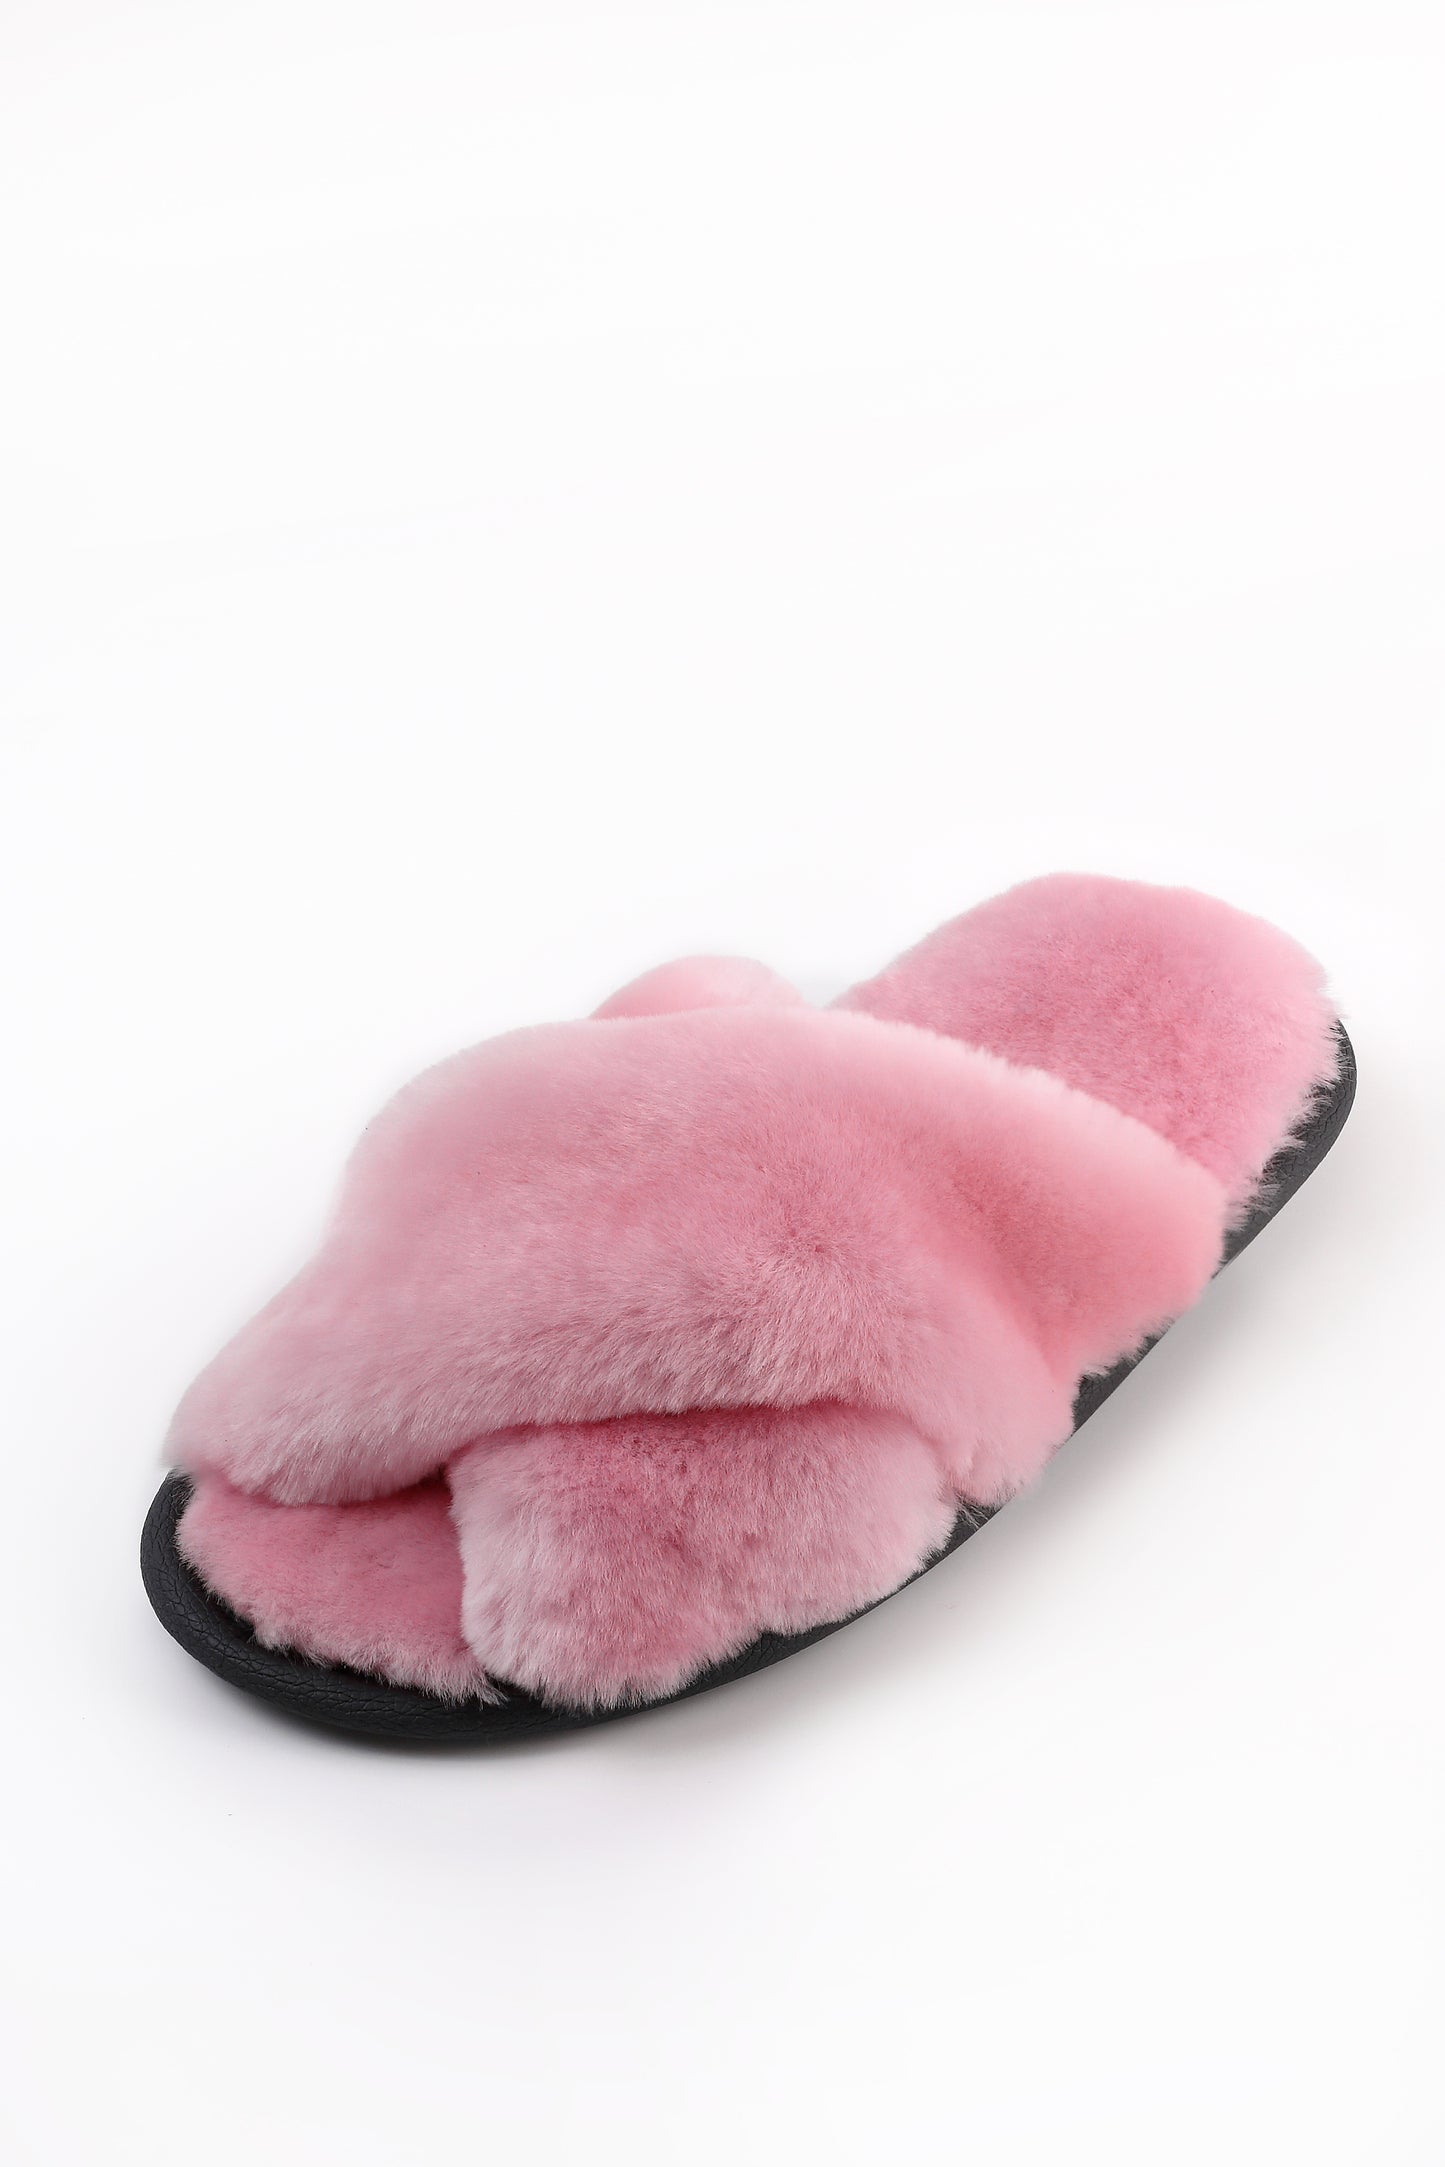 Soft Crossover Real Sheepskin Slippers for Women with Fur Lining in Pink Color